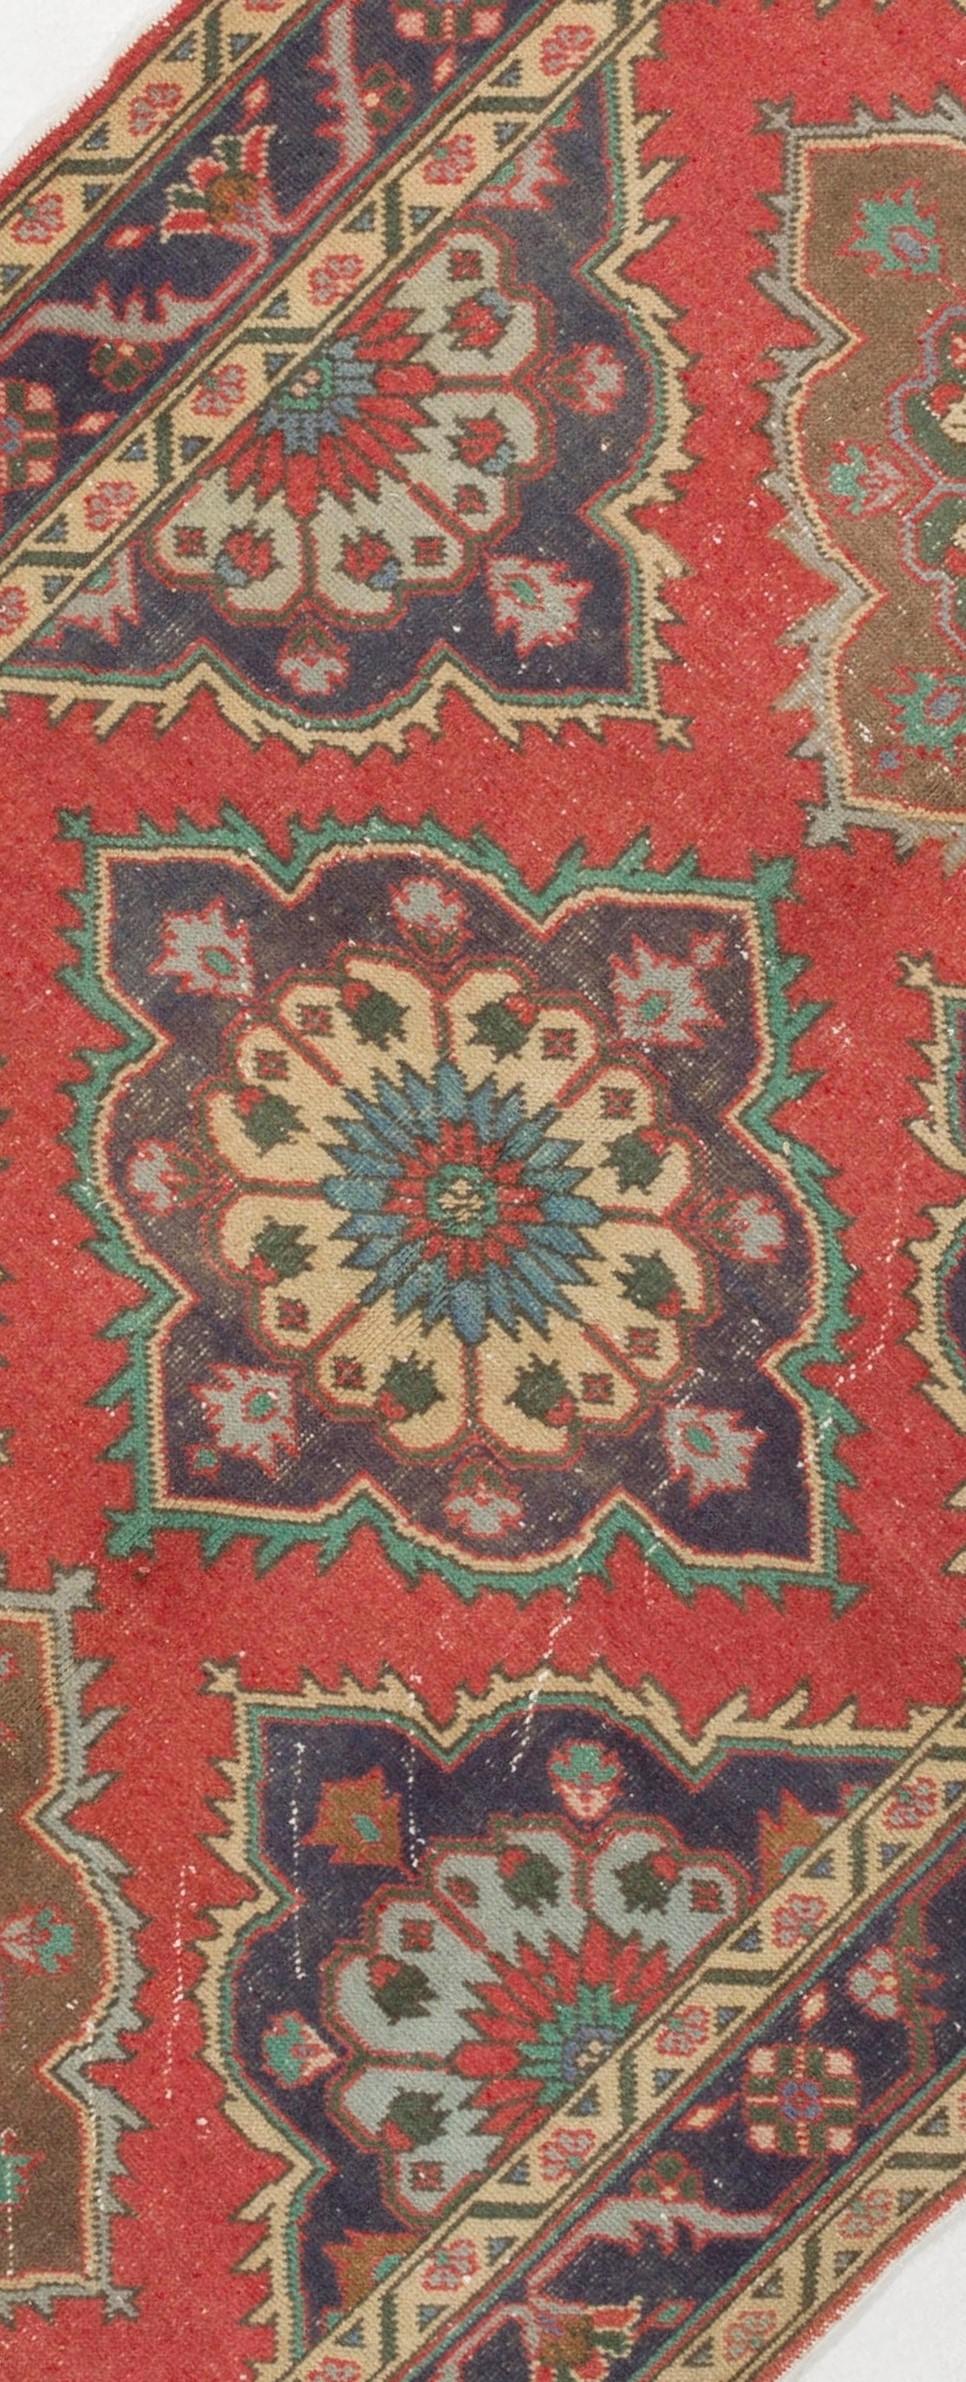 An early 20th century hand-knotted wool Turkish runner rug with soft wool pile on cotton foundation. It features a multiple medallion design in red, indigo, beige and green.
Very good condition. Sturdy and as clean as a brand new rug (deep washed